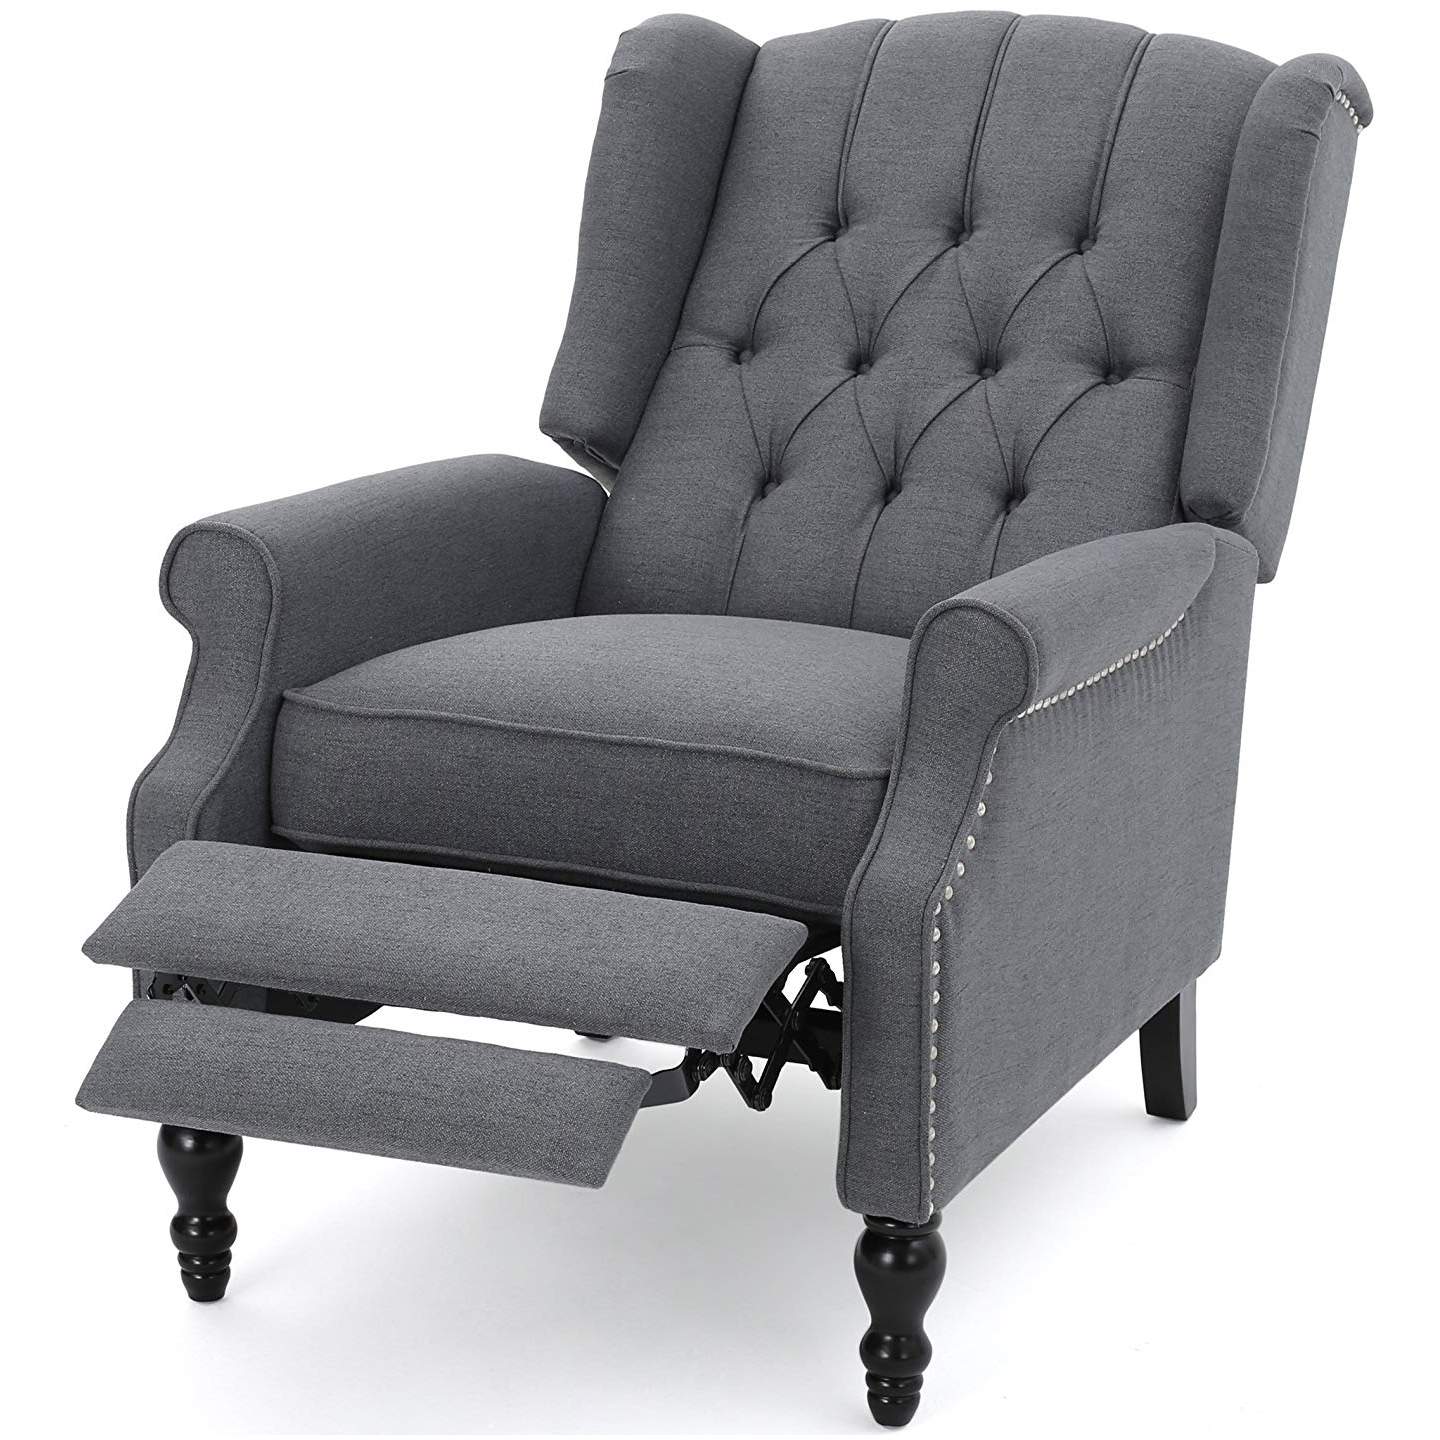 Christopher Knight Home Elizabeth Tufted Charcoal Gray Recliner